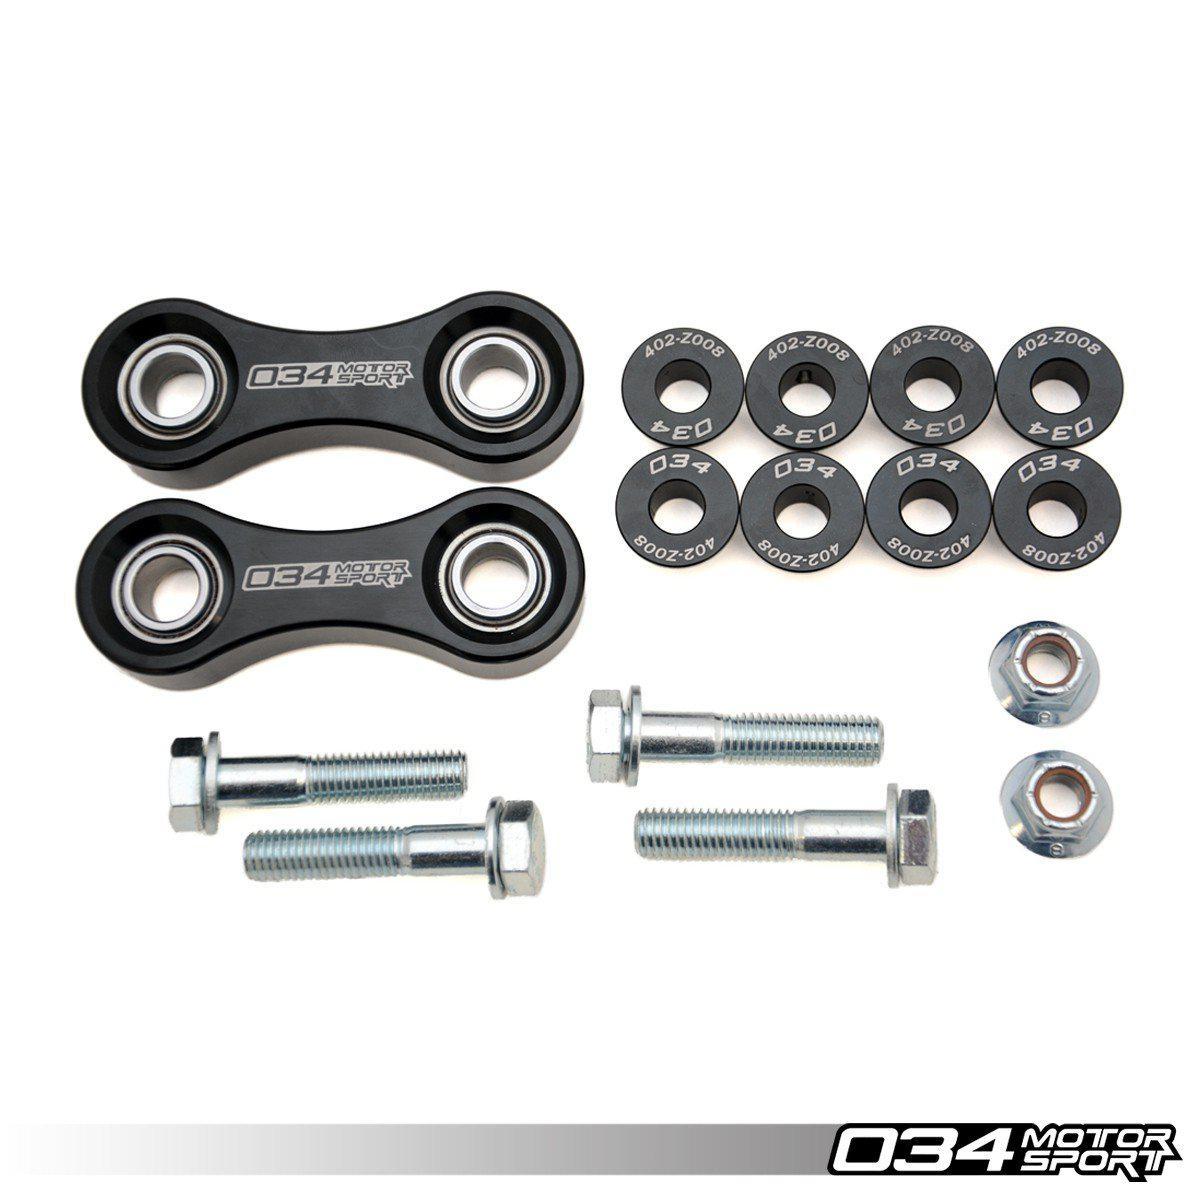 Spherical Rear Sway Bar End Links, C5 Audi A6/S6/RS6 &amp; Allroad, B5/B5.5 Volkswagen Passat 4motion-A Little Tuning Co